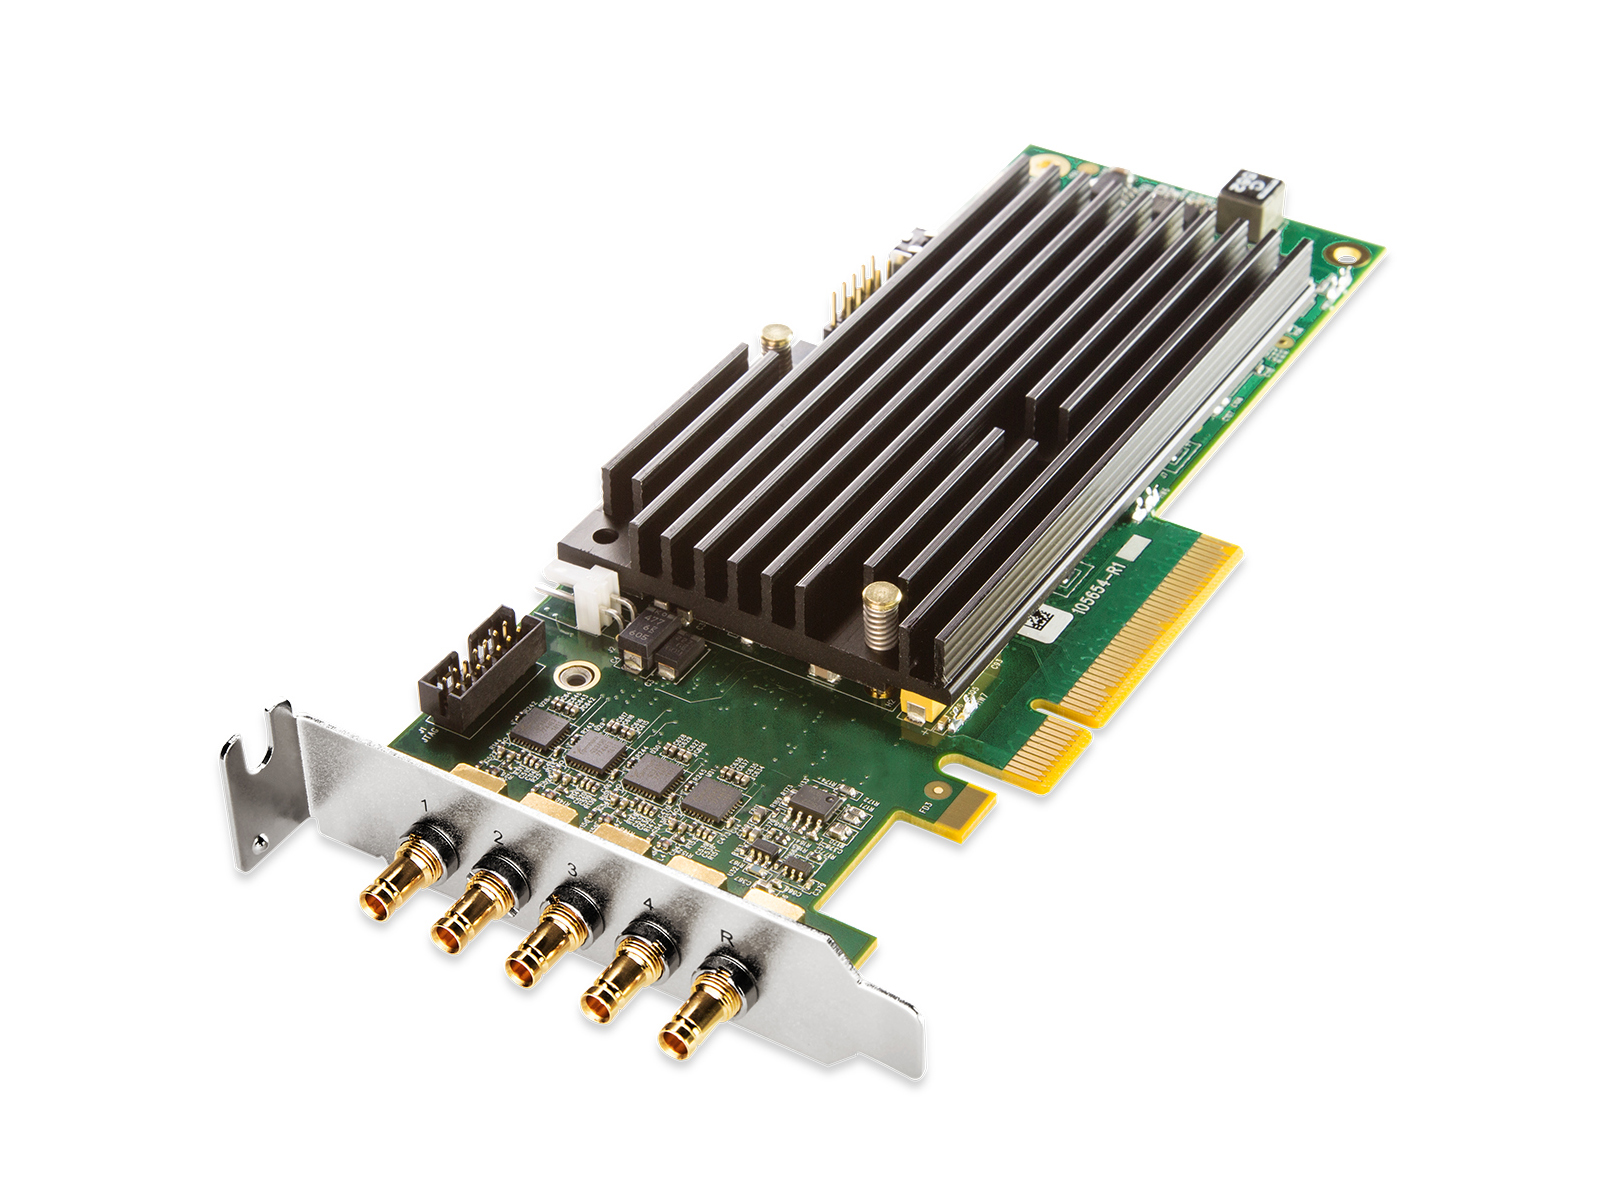 AJA CRV44-S-NF Corvid 44 with low profile PCIe bracket and passive heat sink/includes 5x 101999-02 cables